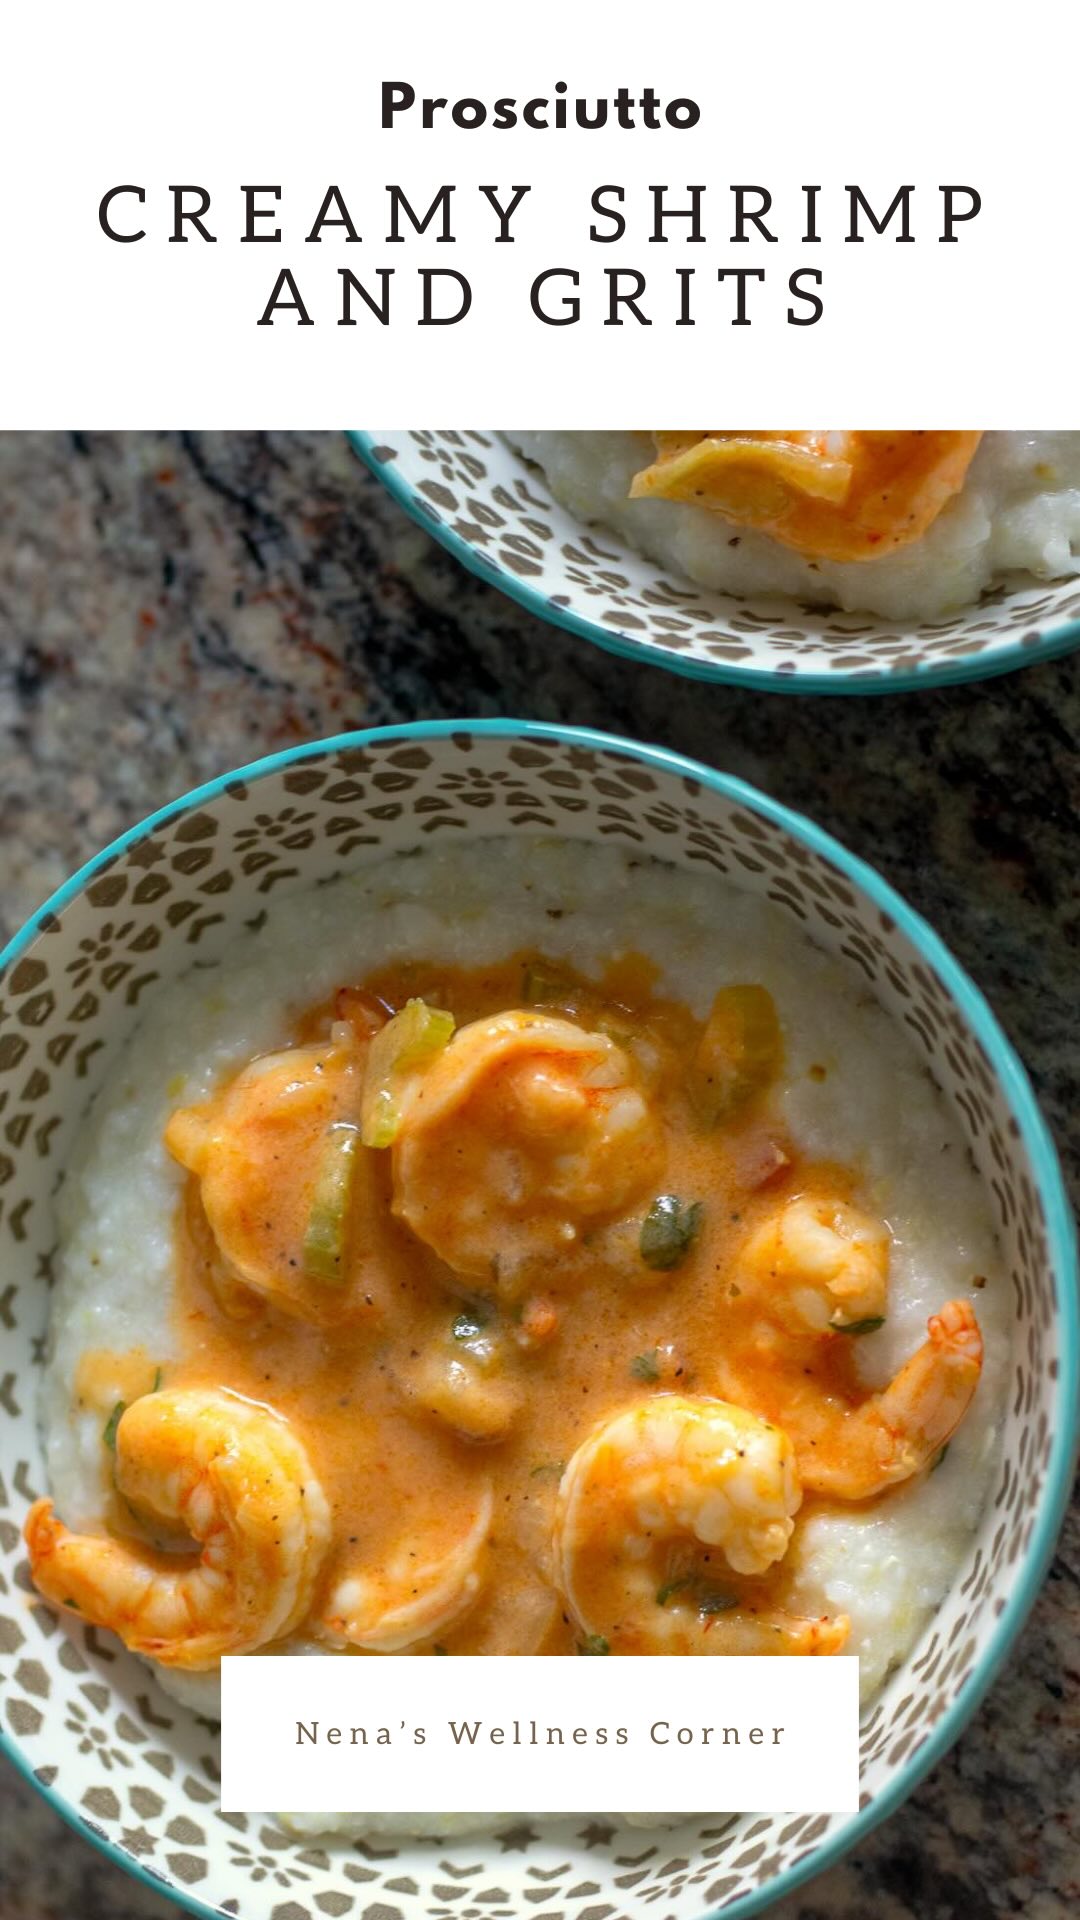 Prosciutto Shrimp served Over Creamy Cheese Grits in a Bowl Pinterest Pin